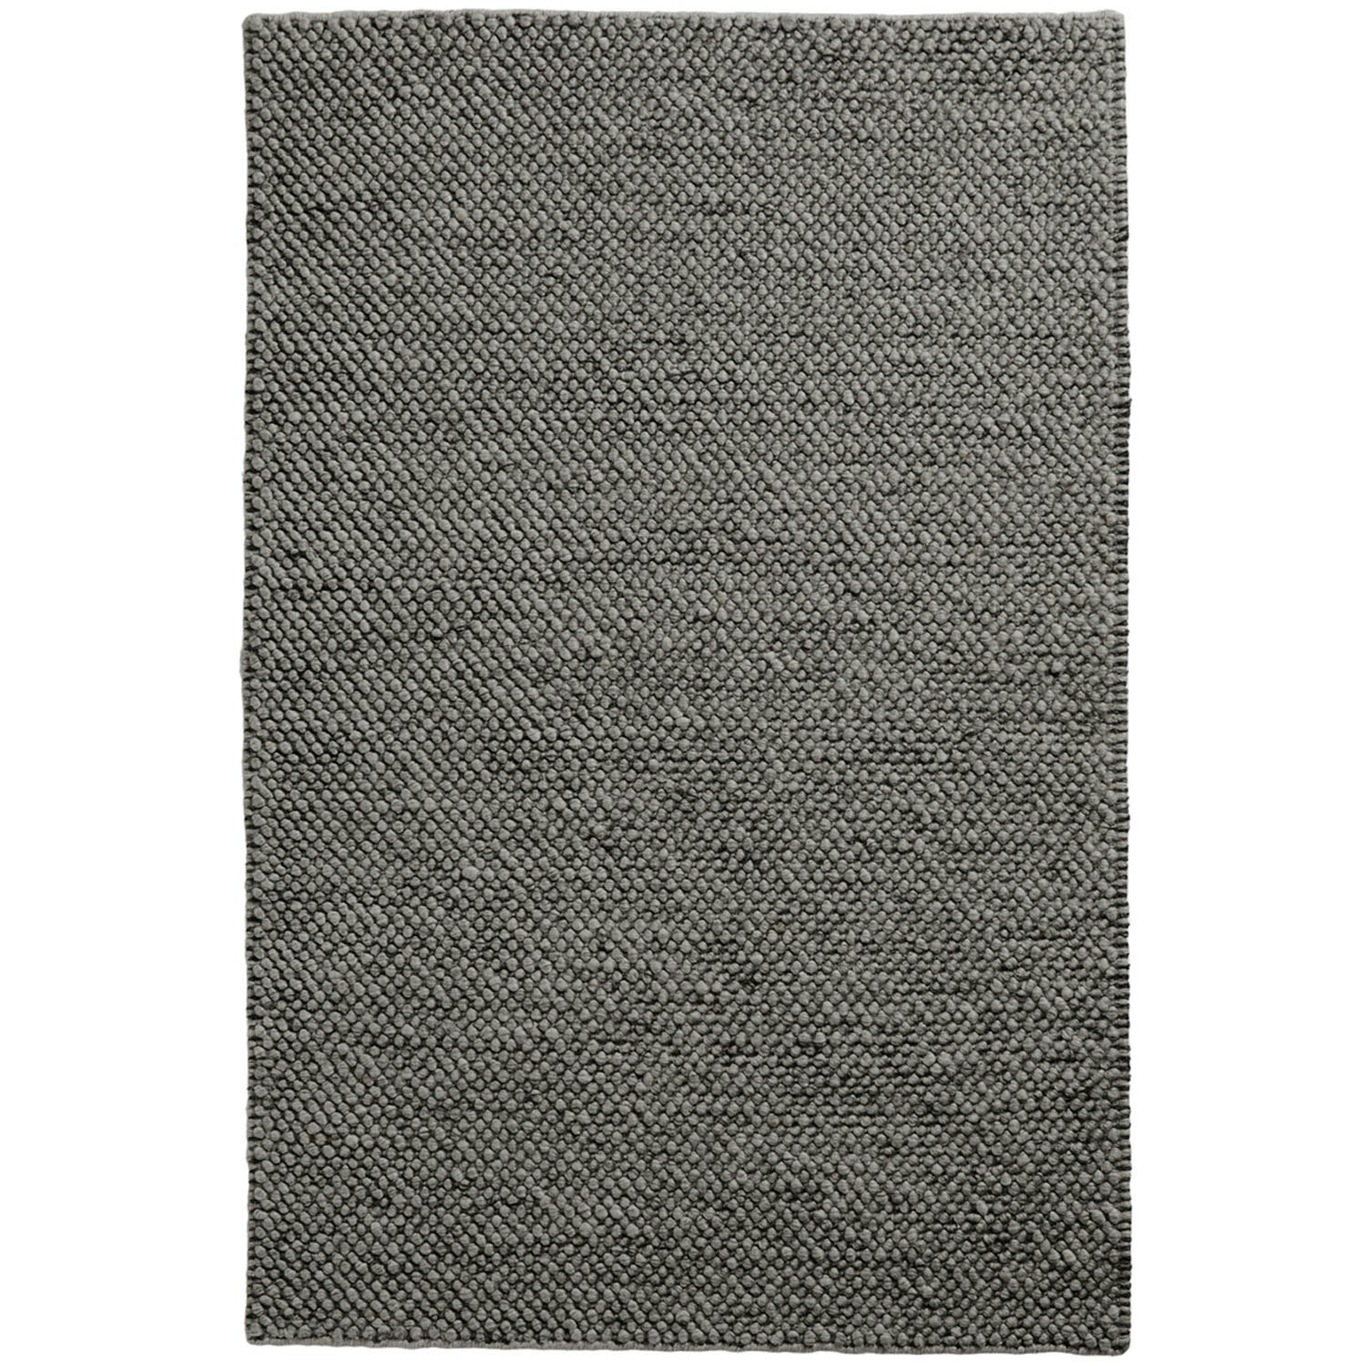 Tact Teppe Ull 200x300 cm, Anthracite Grey